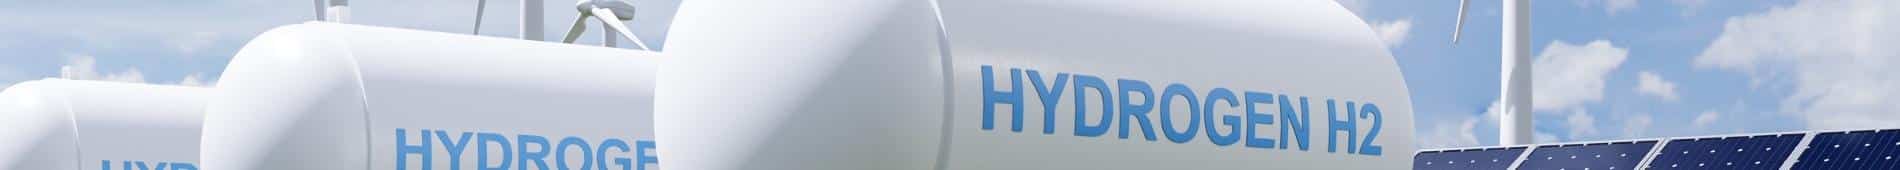 Hydrogen Production, Storage and Application for a Sustainable Future